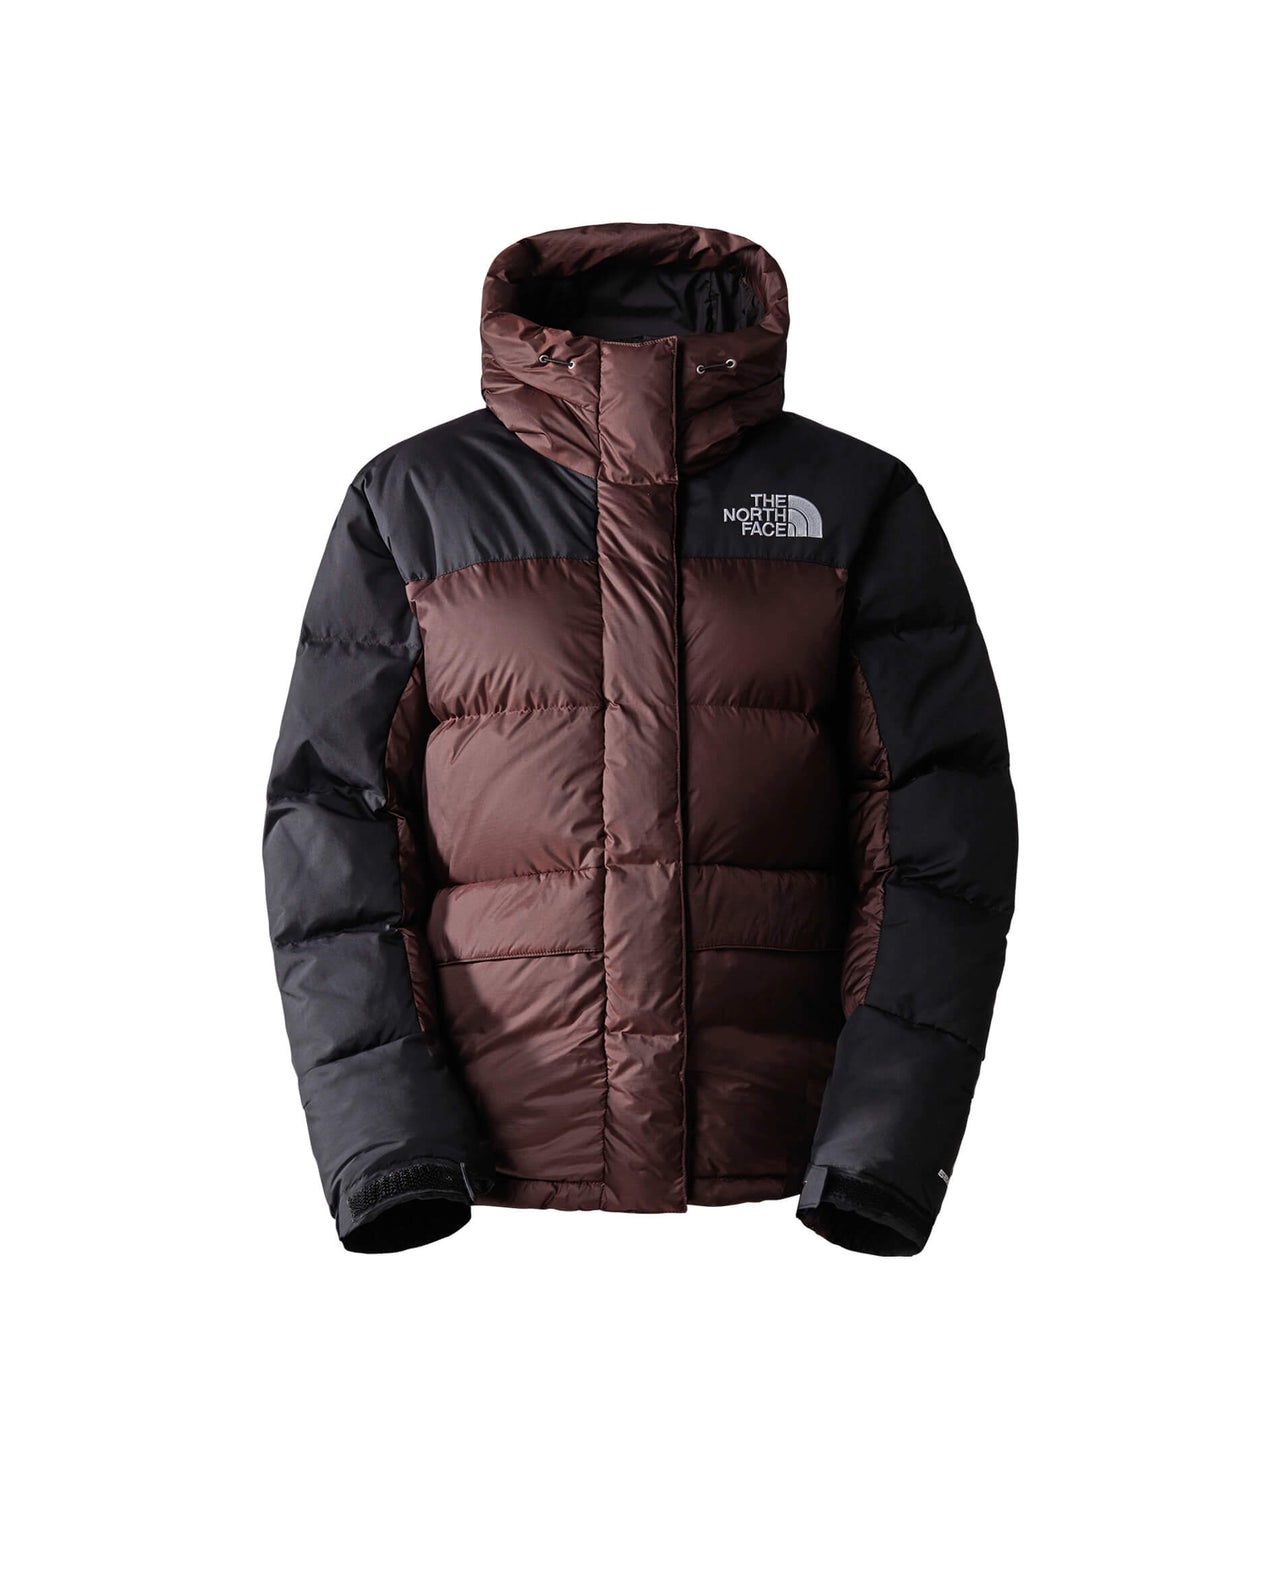 The North Face Women's Himalayan Down Parka